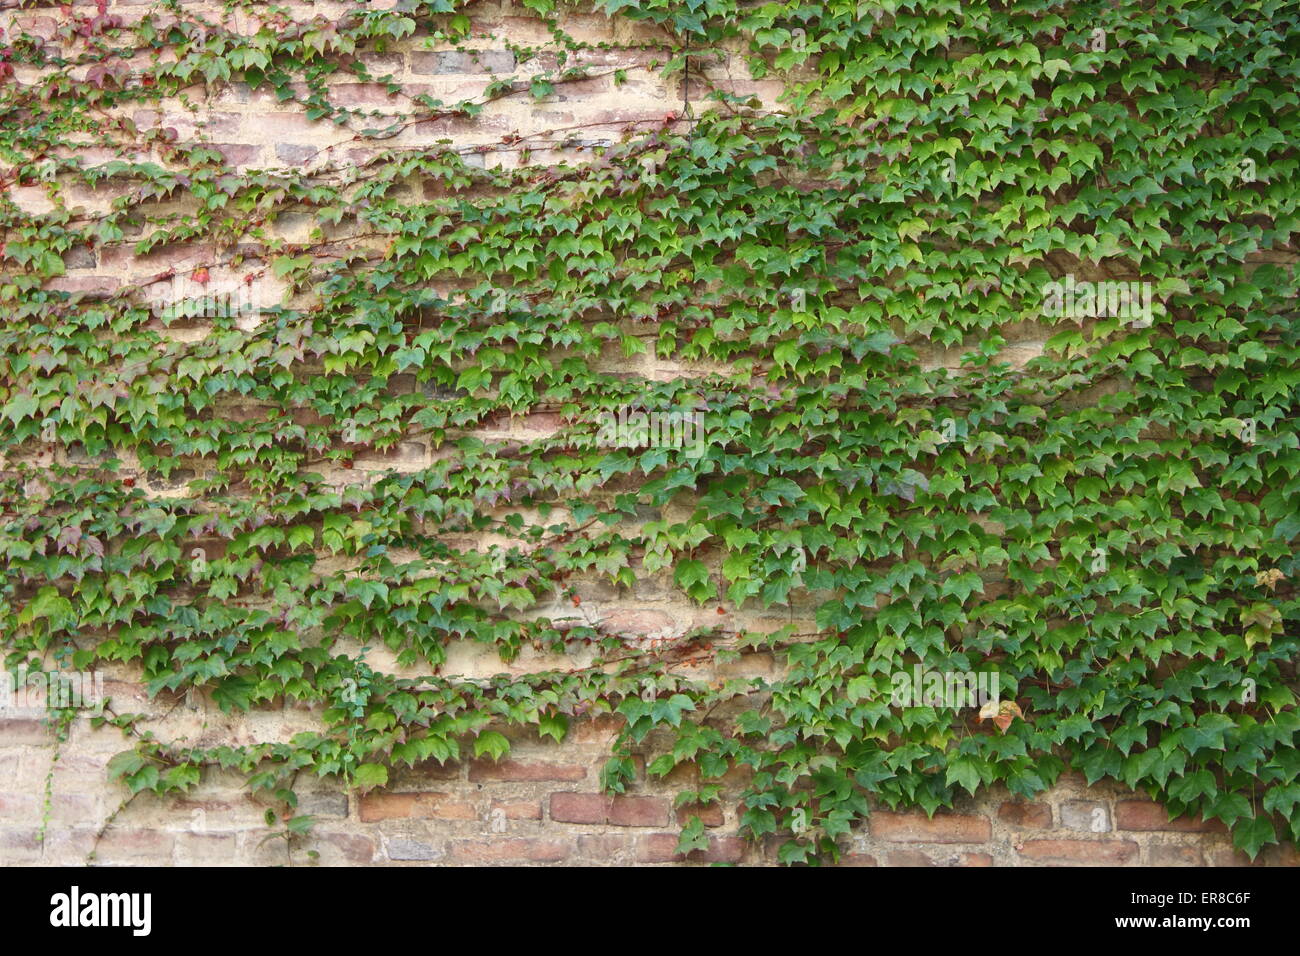 Green ivy leaves covering a wall Stock Photo